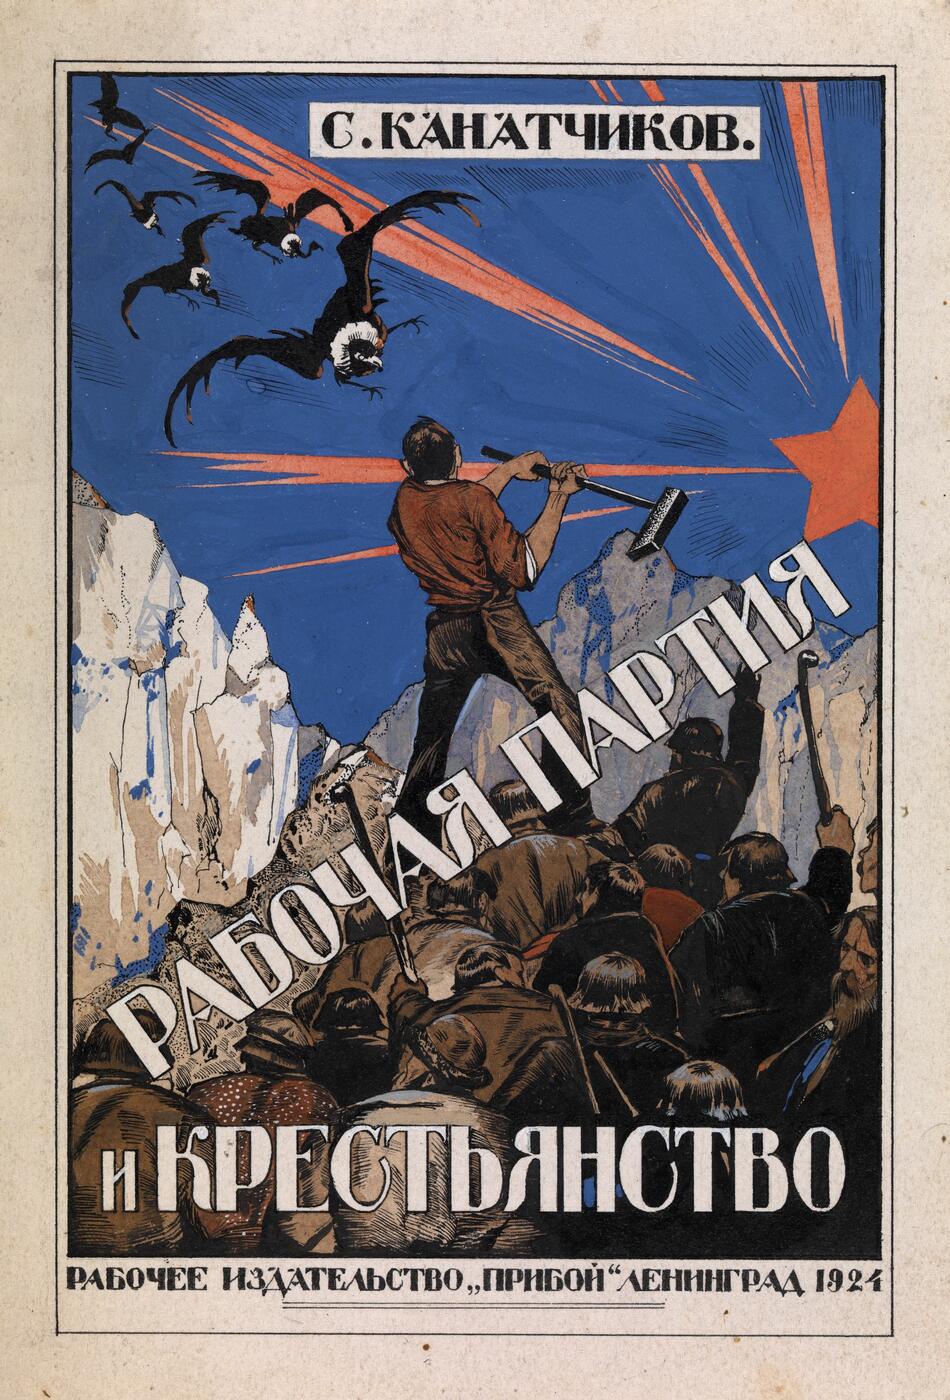 Cover Design for "Rabochaya Partiya i Krest'yanstv" (The Workers' Party and the Peasant Class) by Semion Kanatchikov, 1924